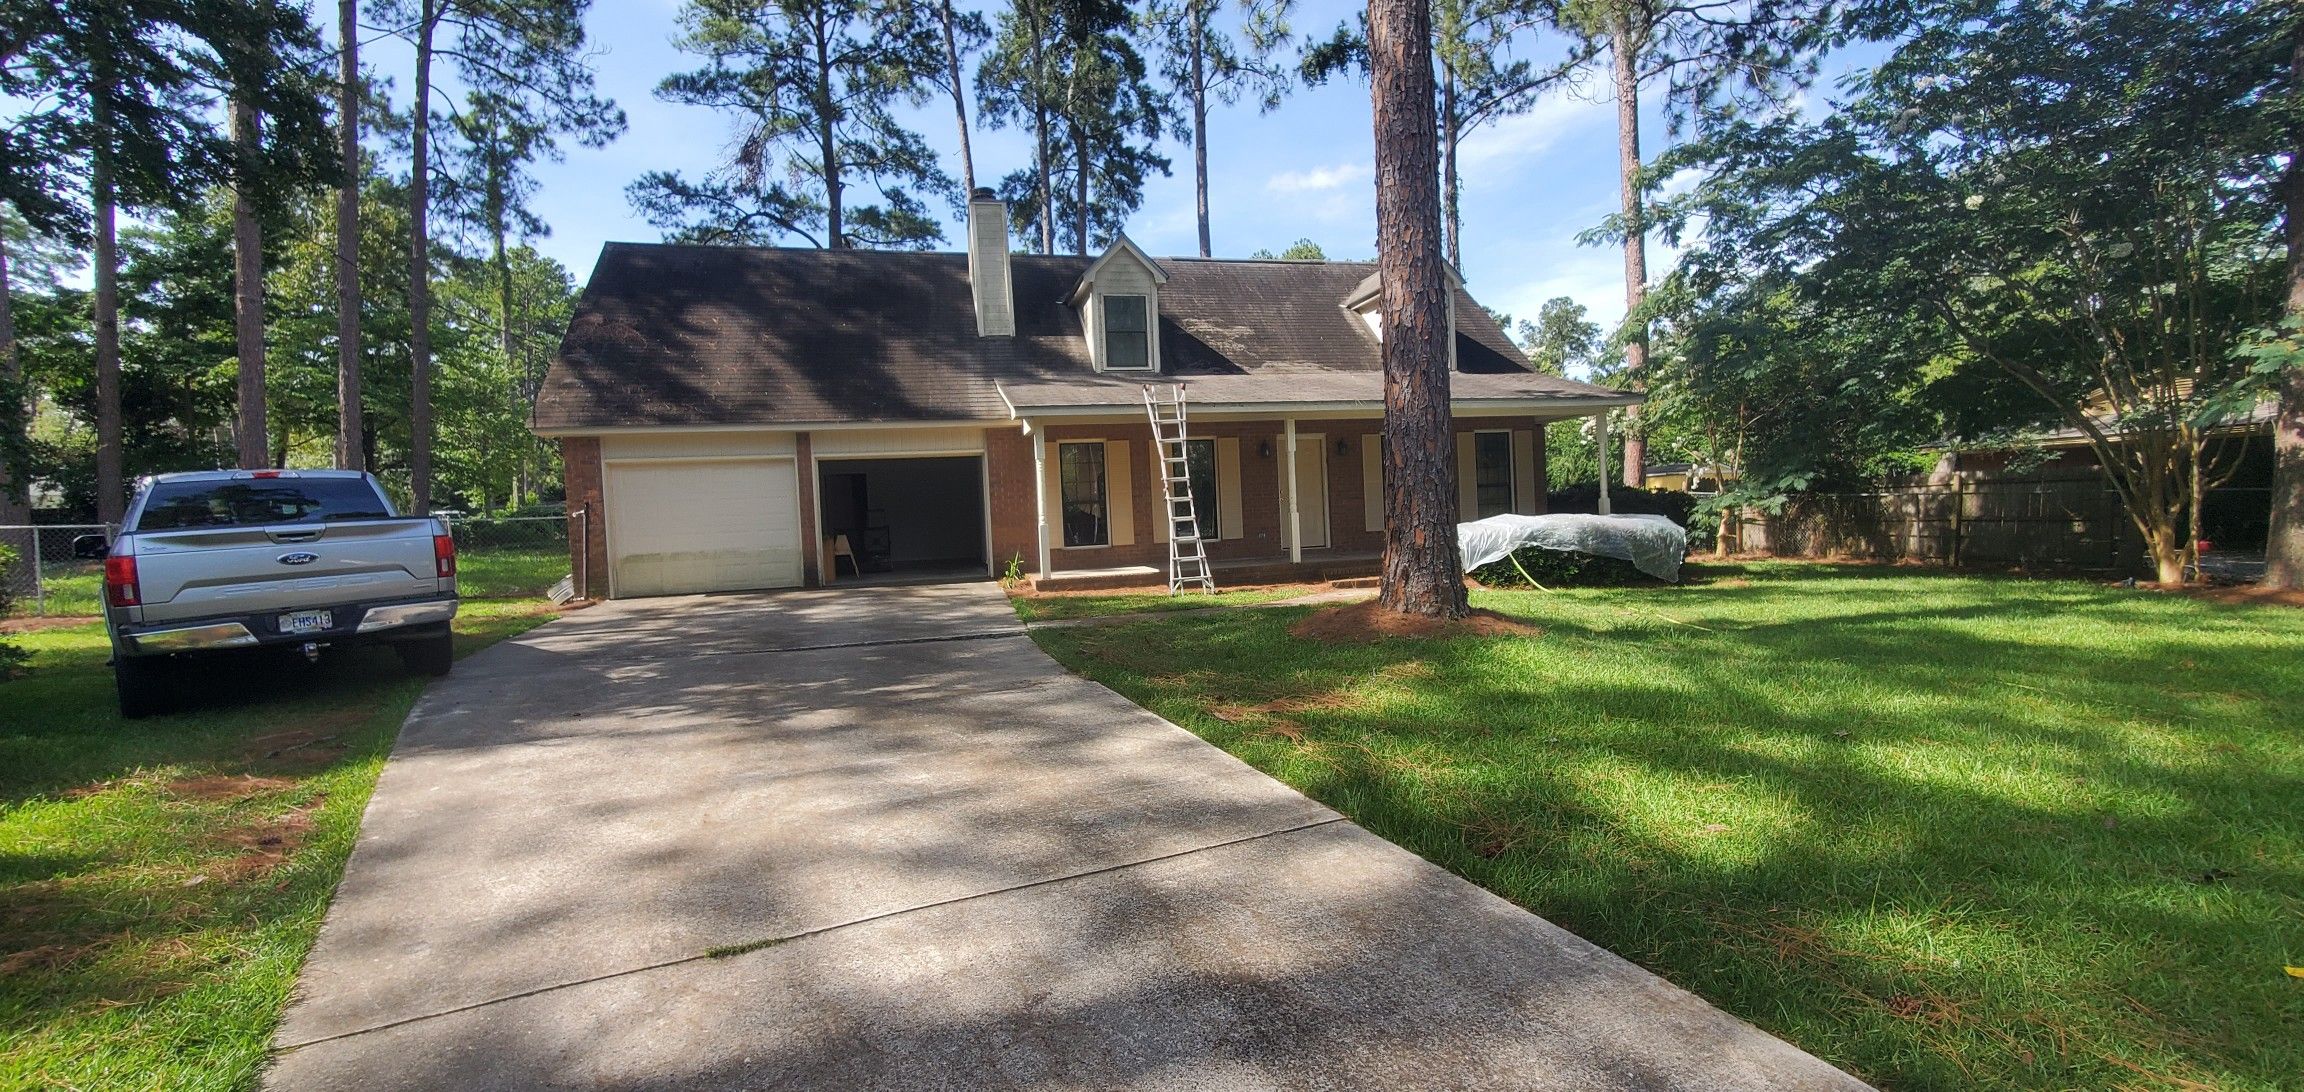 Our Best Work for Precision Exterior Services in Blackshear, GA